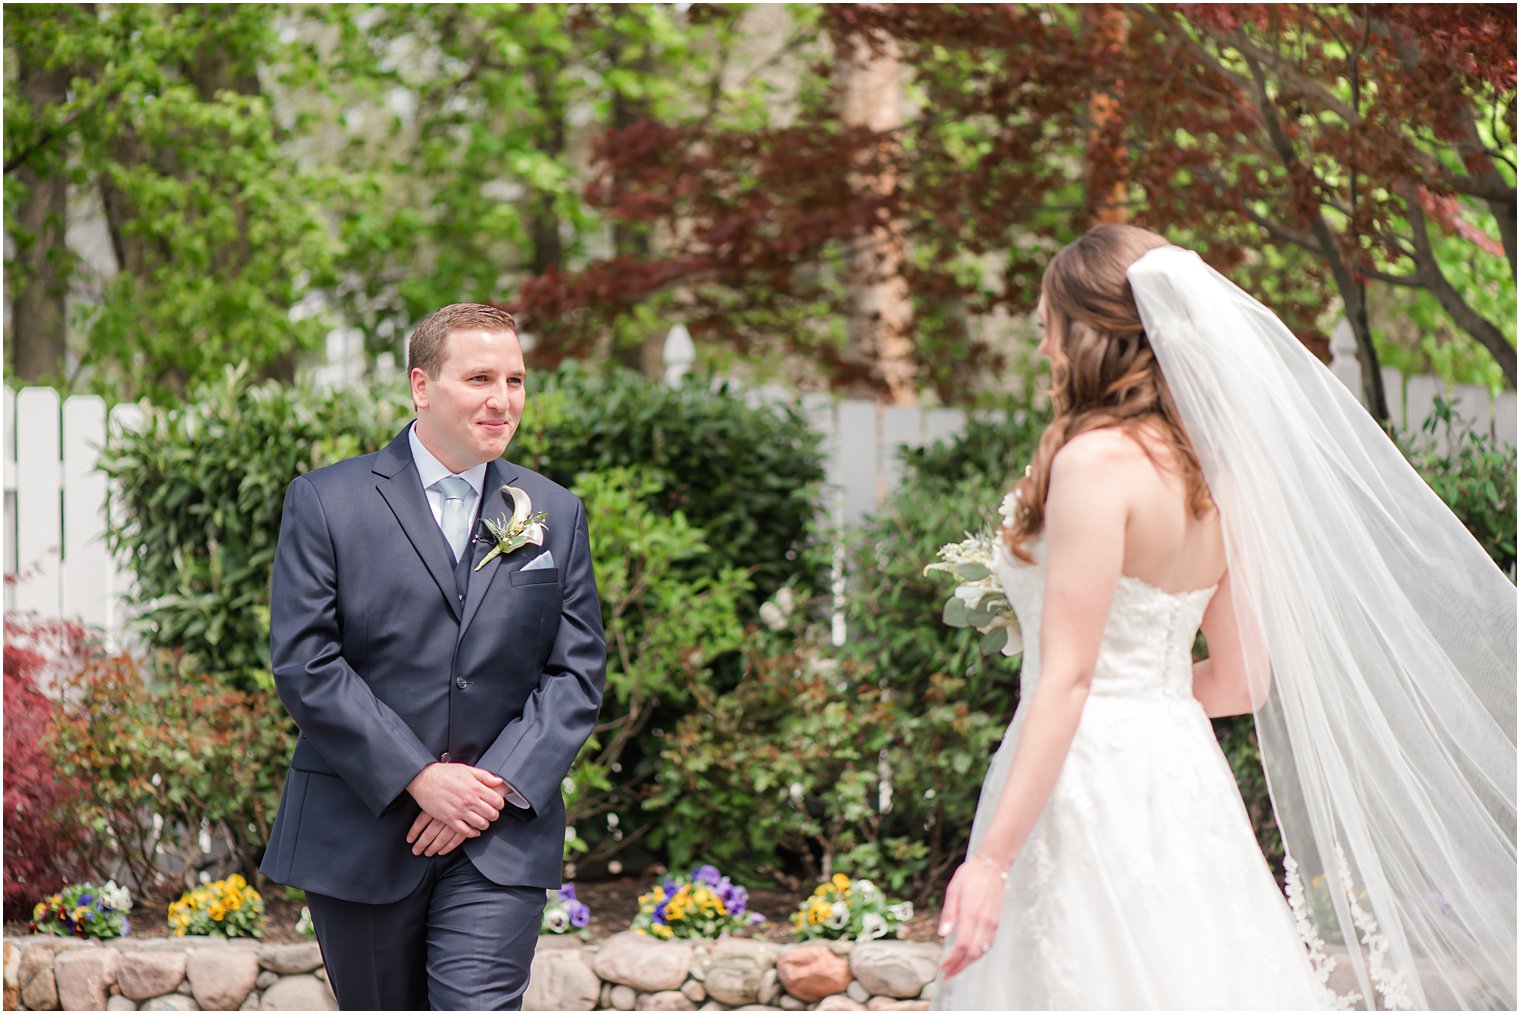 groom turns to see bride during first look in gardens of The English Manor